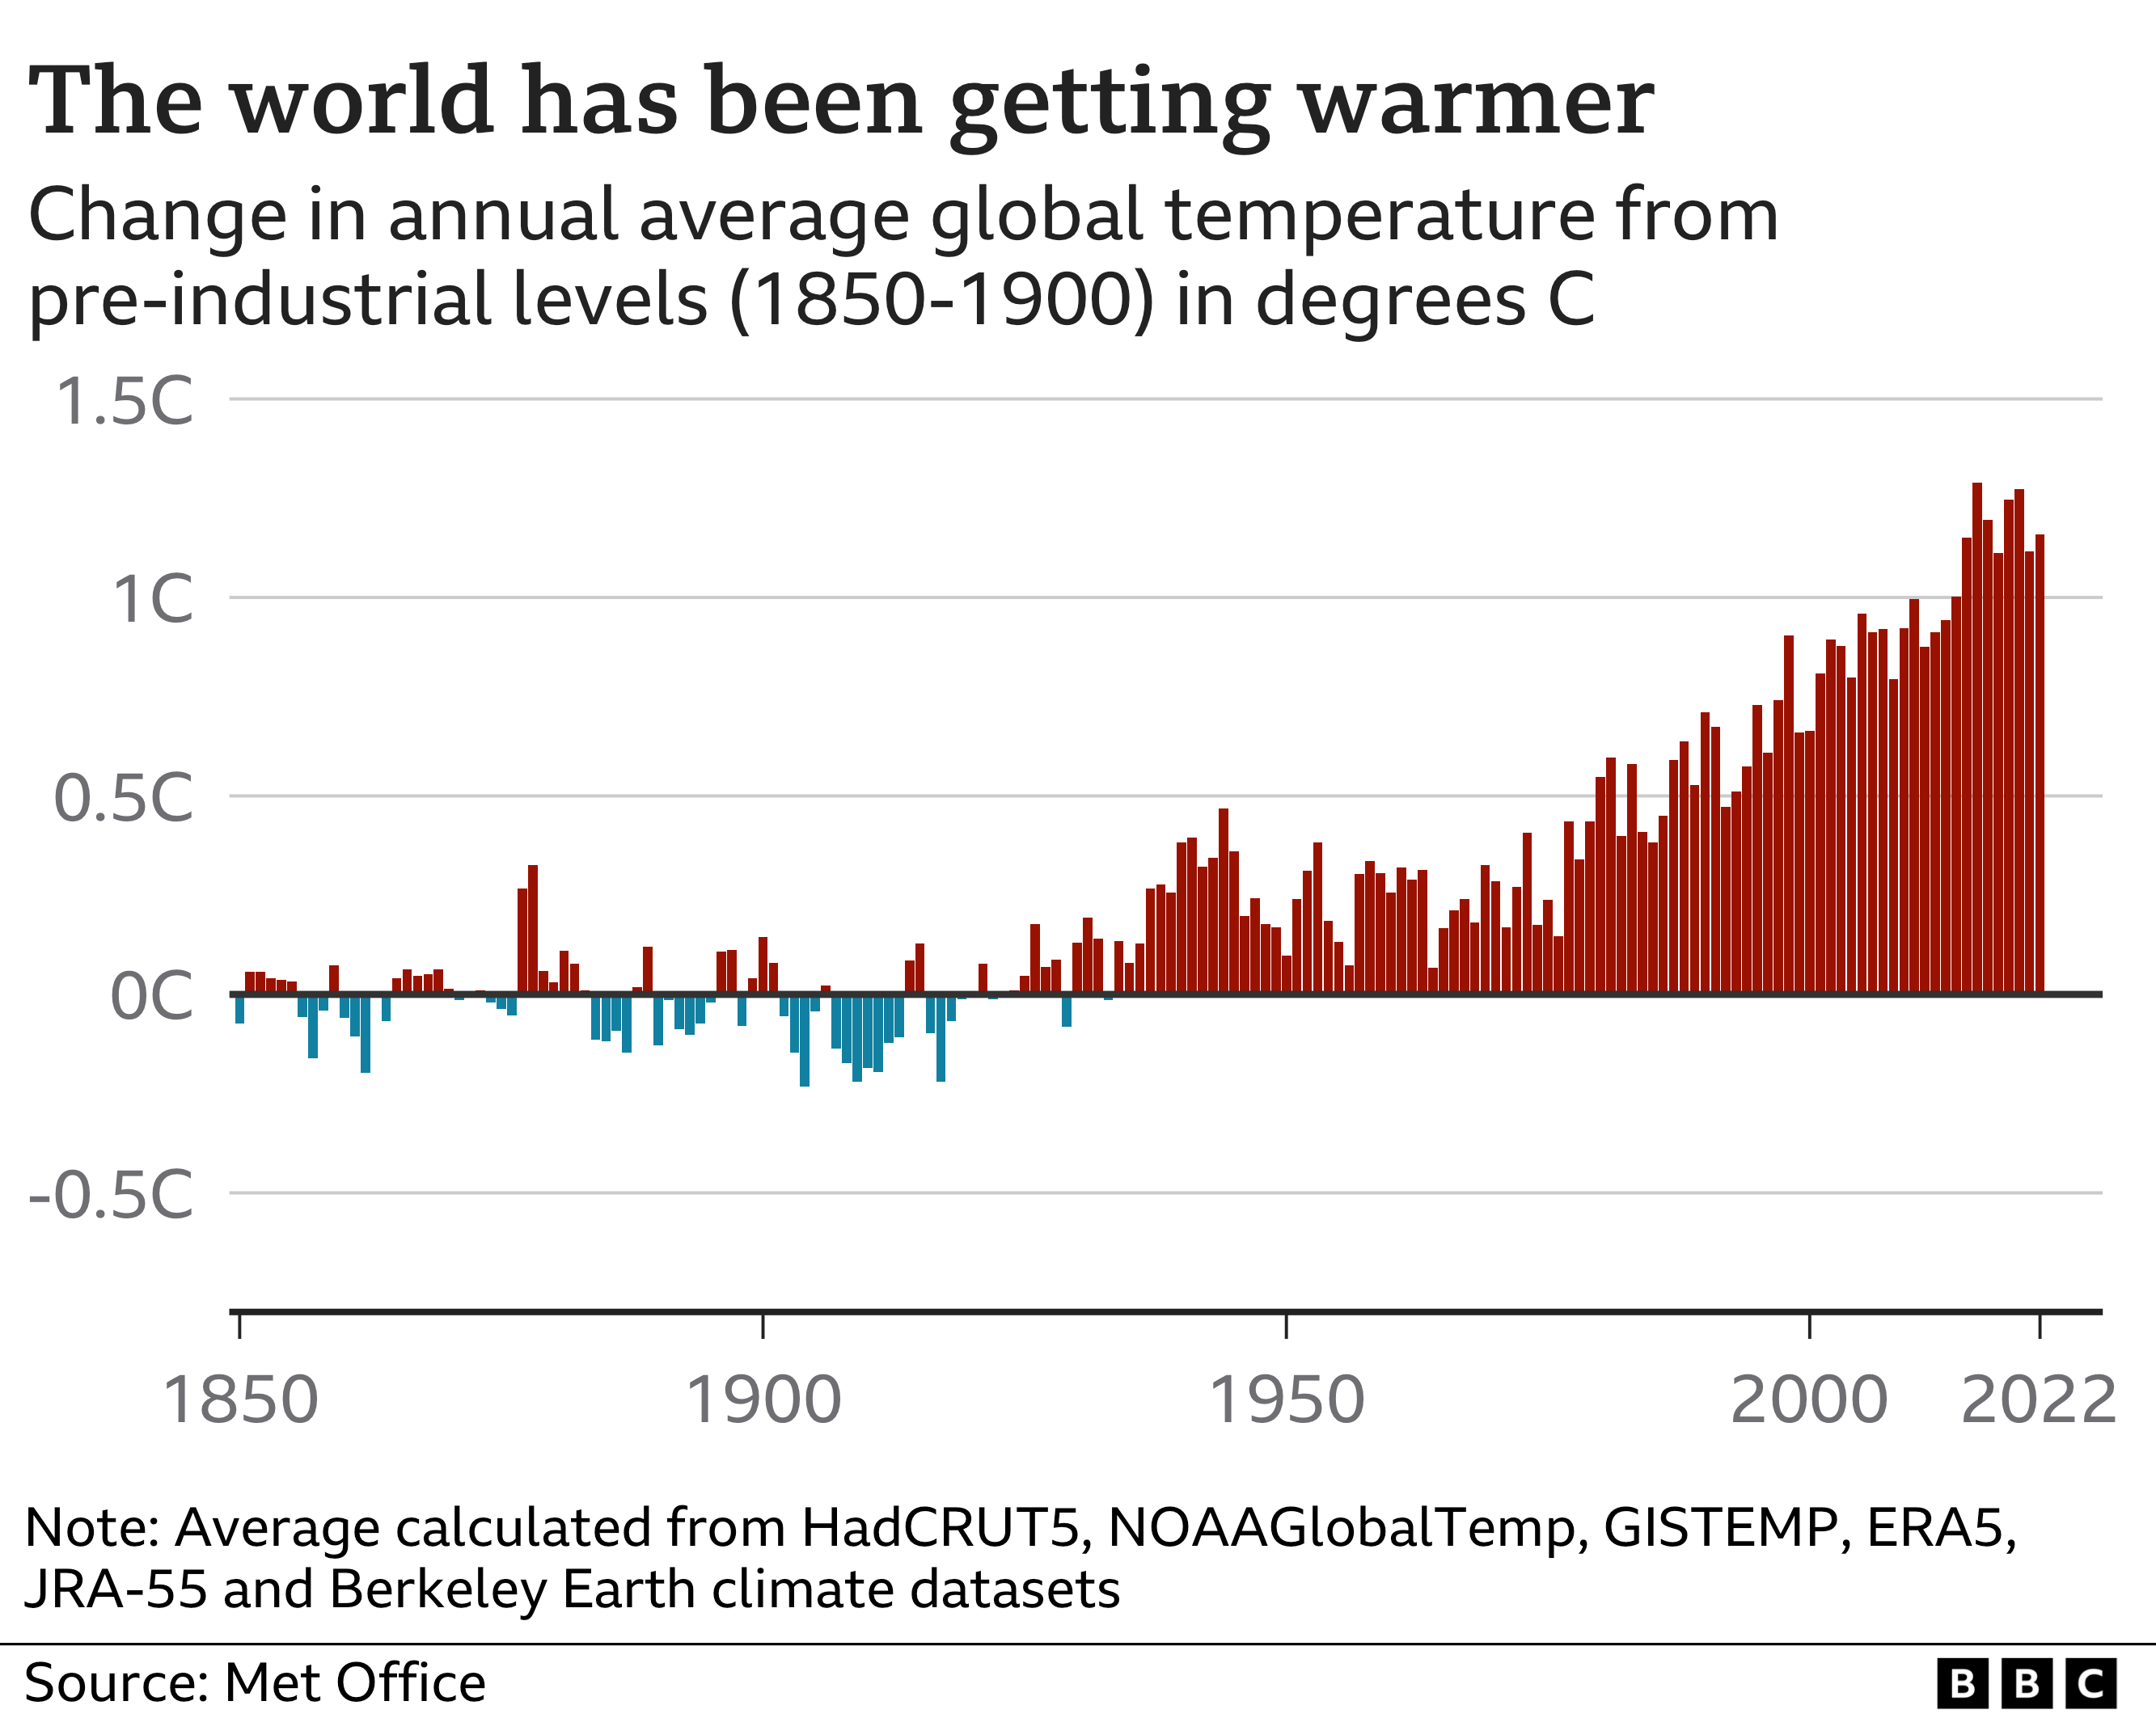 Change in global temperature compared to the pre-industrial average. Temperatures were around average until about 1950, but have increased since, regularly exceeding 1C of warming in the last decade.